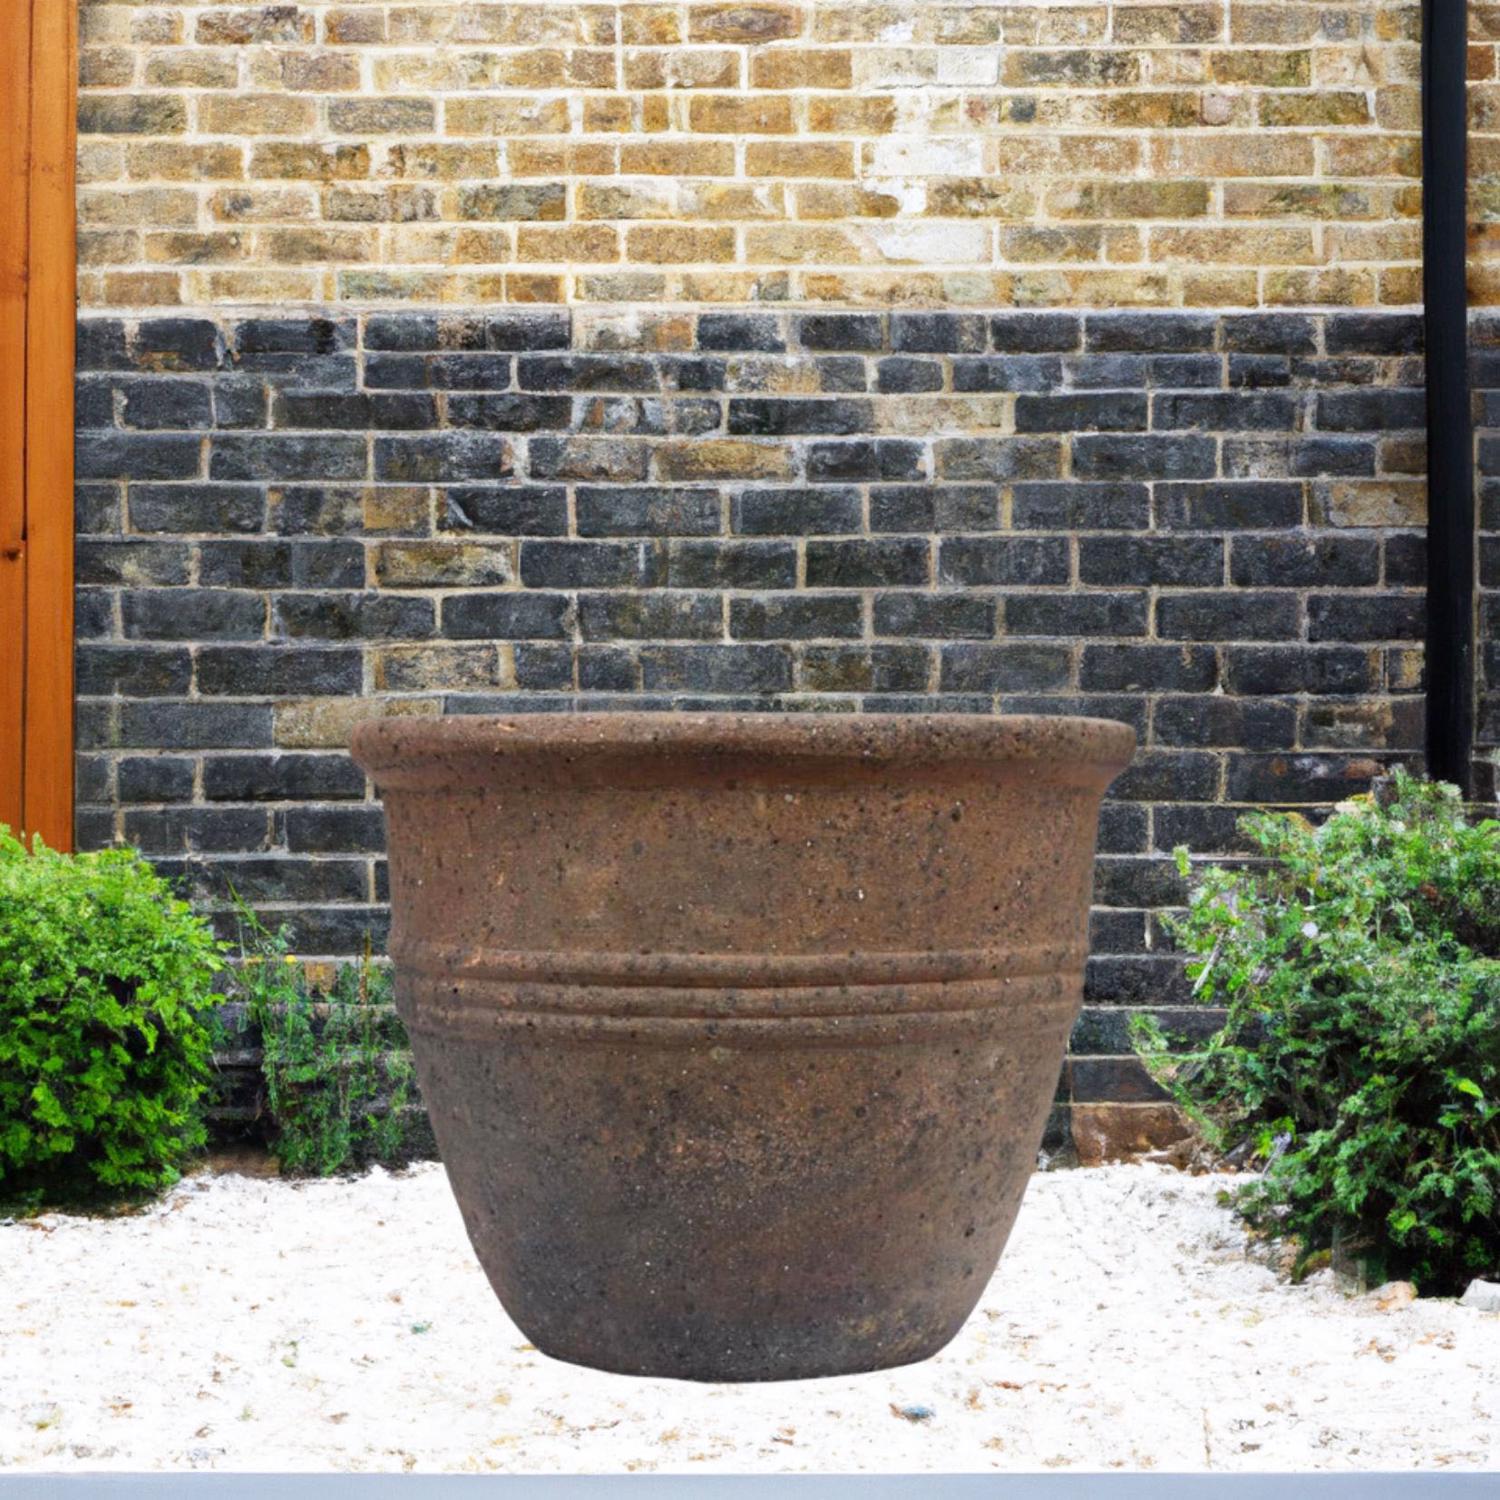 Old Ironstone - Lined Cylinder Round Pot Planter